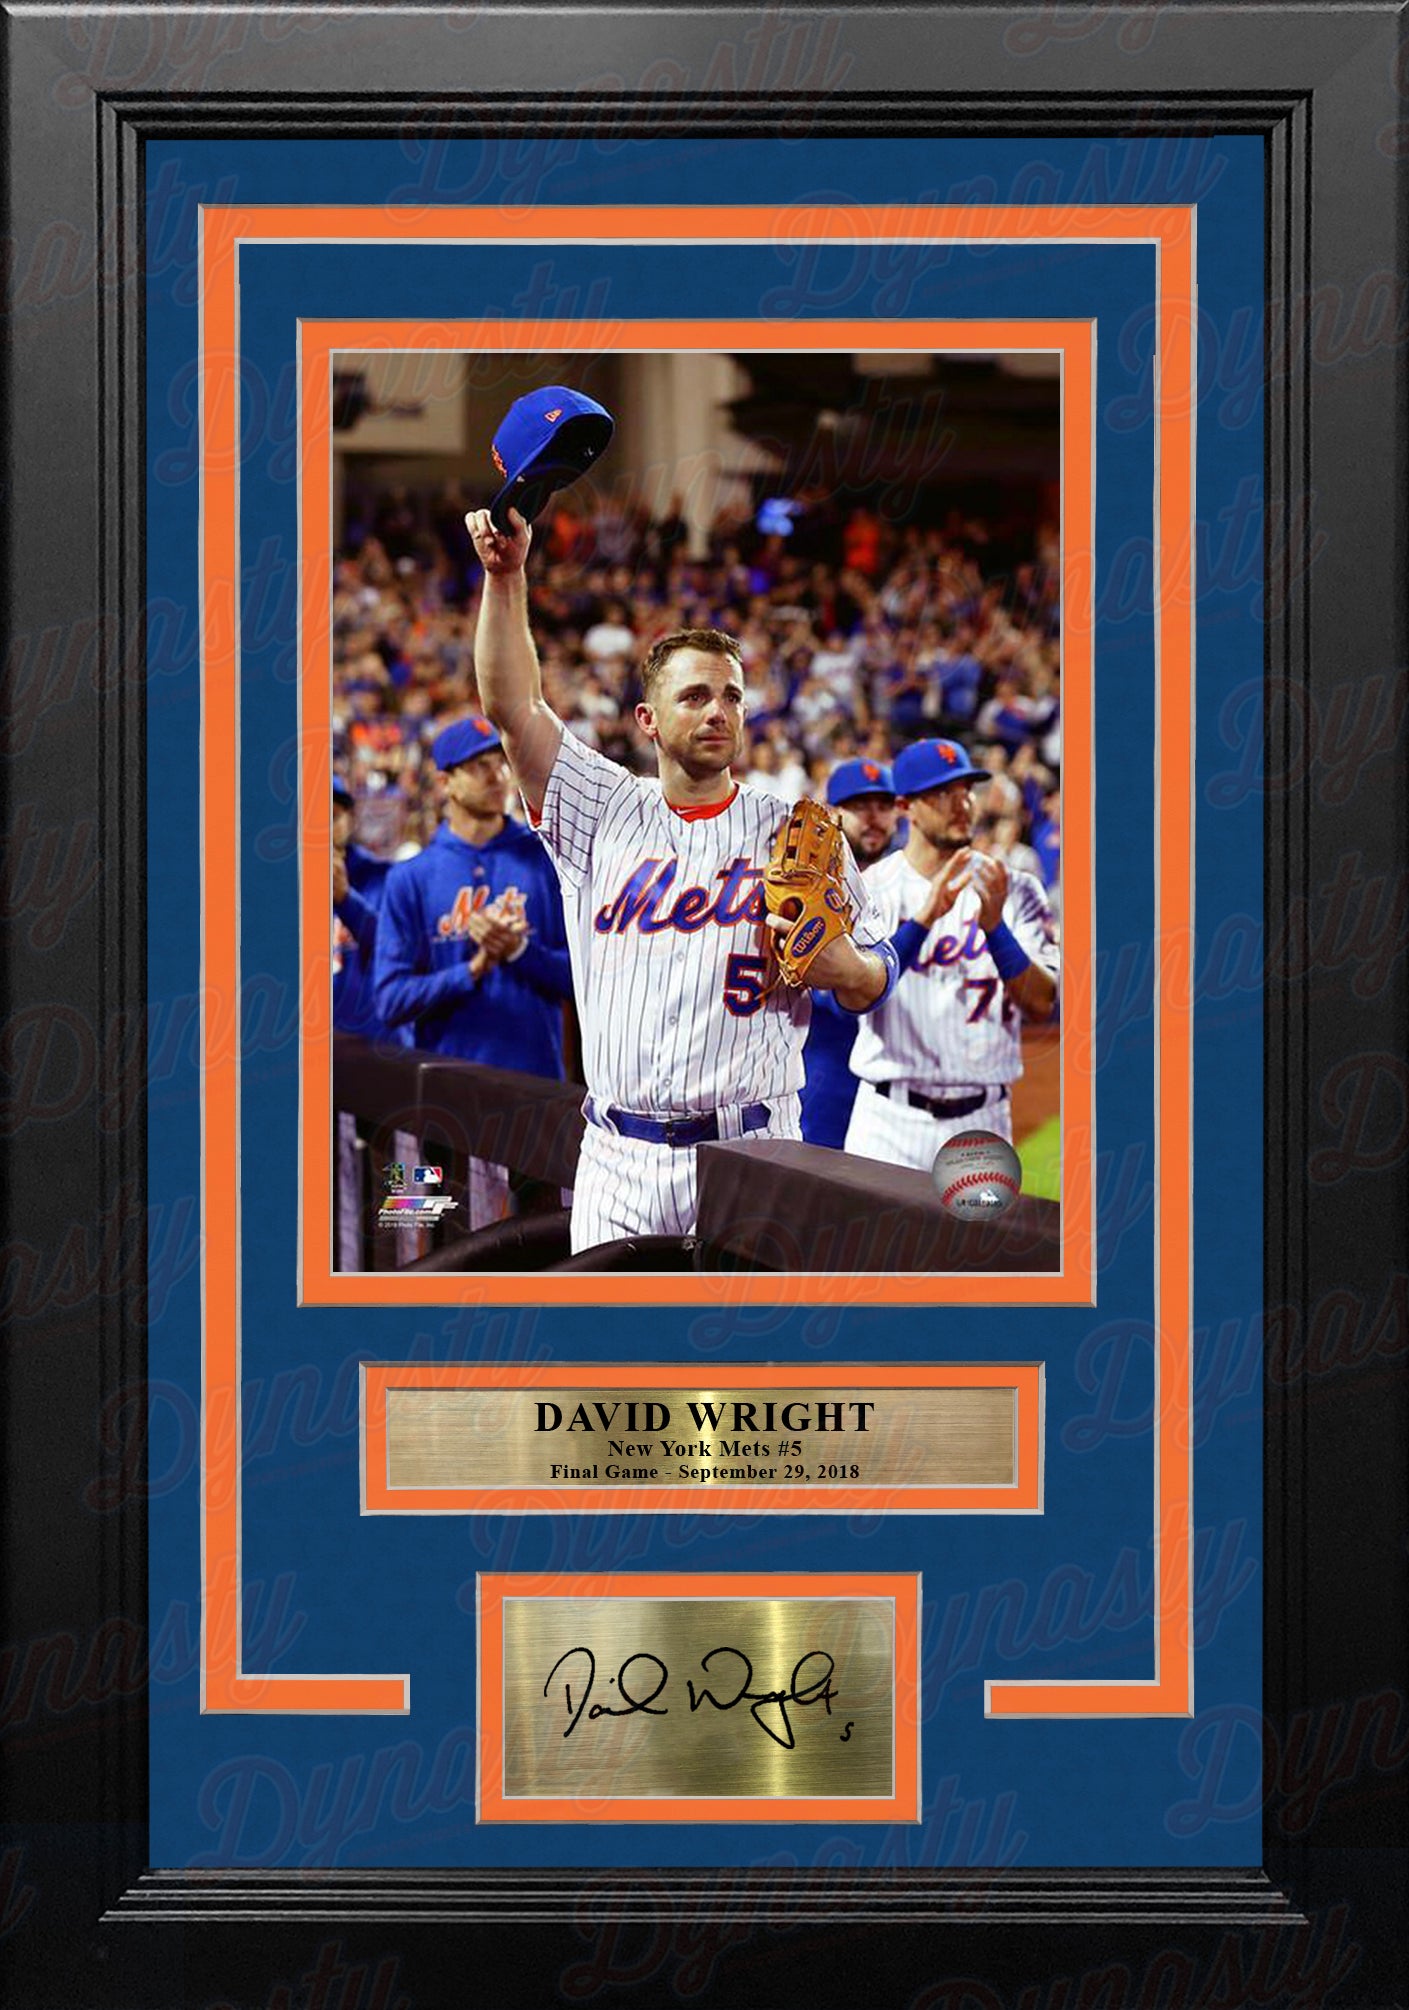 David Wright Final Game New York Mets 8 x 10 Framed Baseball Photo with  Engraved Autograph